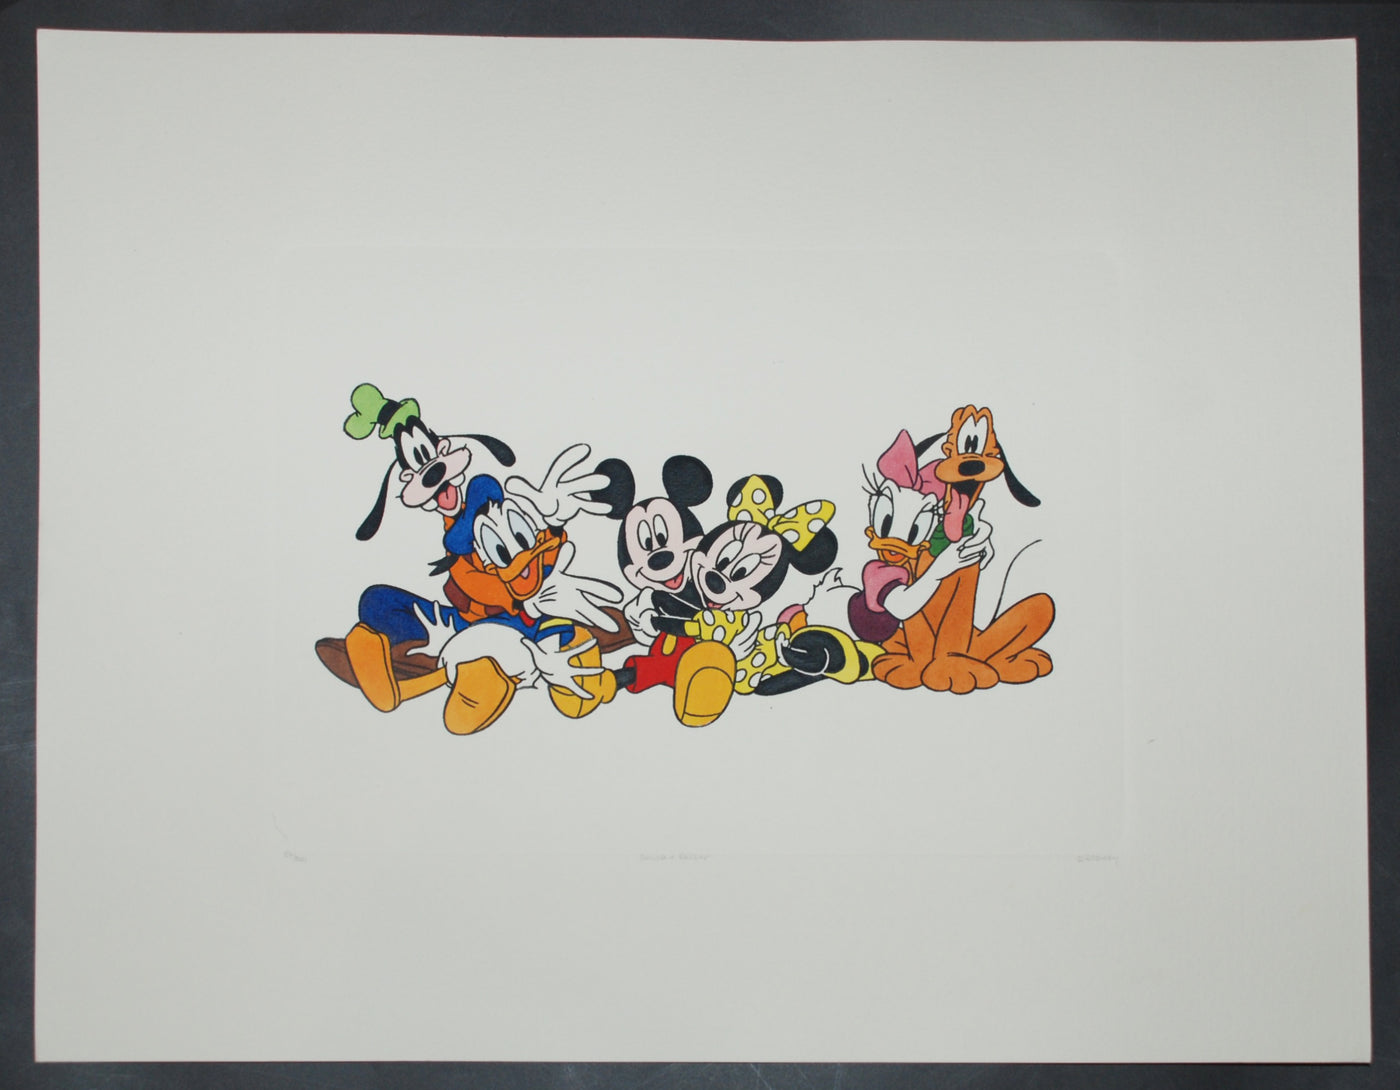 Disney Animation Art Hand Colored Etching Featuring Mickey Mouse and friends